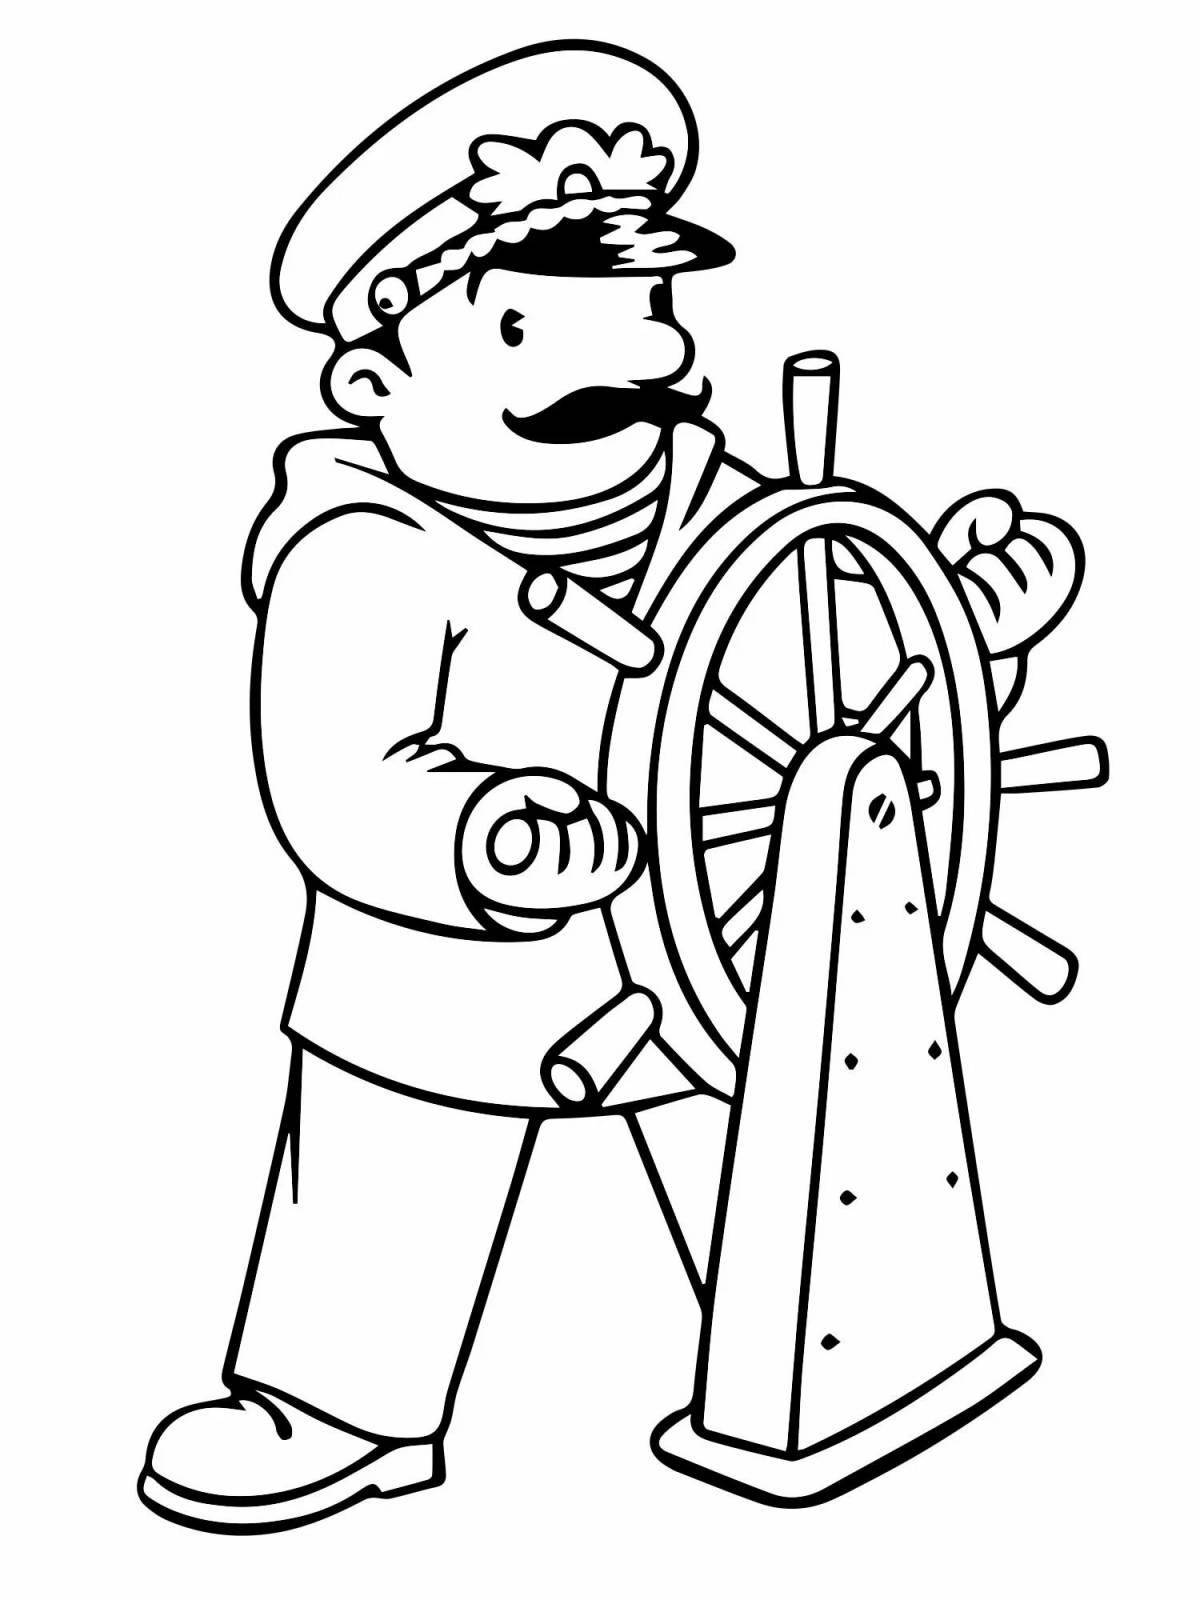 Bright marine coloring book for kids